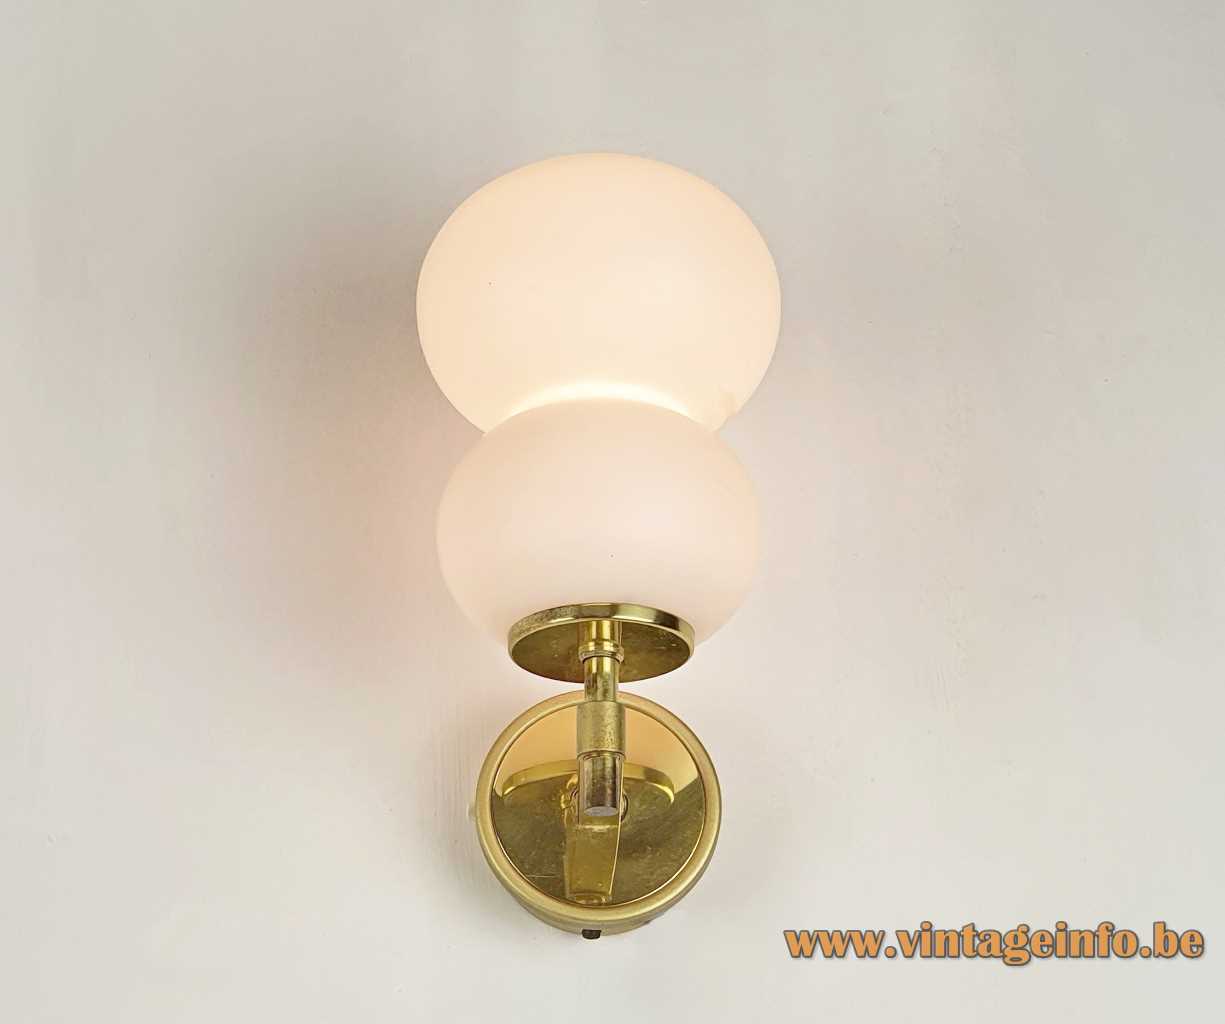 DORIA pumpkin wall lamps white opal glass lampshades brass wall mount & rod 1960s 1970s Germany